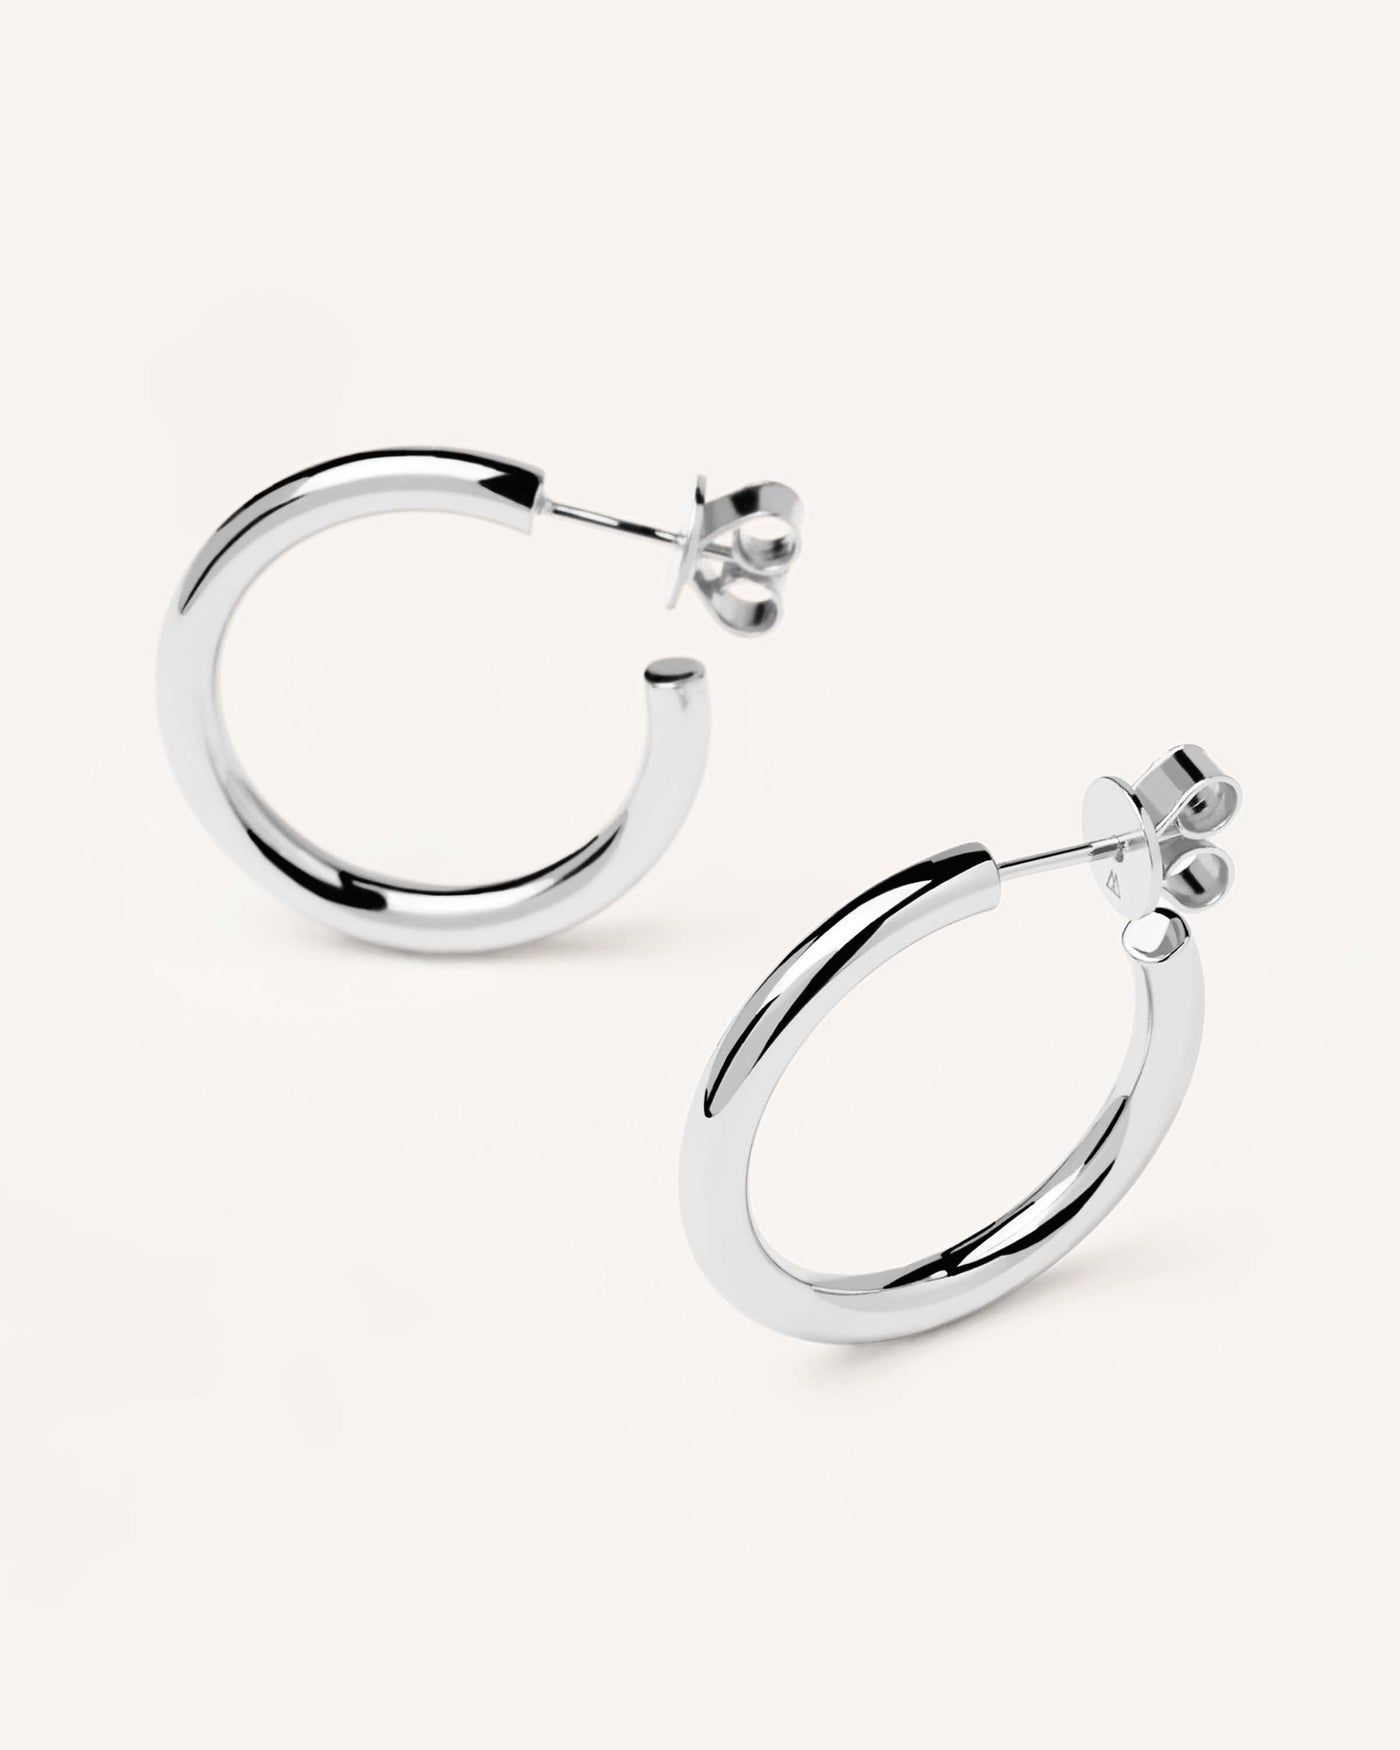 2023 Selection | Supreme Cloud Silver Earrings. Large c hoop earrings in 925 sterling silver. Get the latest arrival from PDPAOLA. Place your order safely and get this Best Seller. Free Shipping.